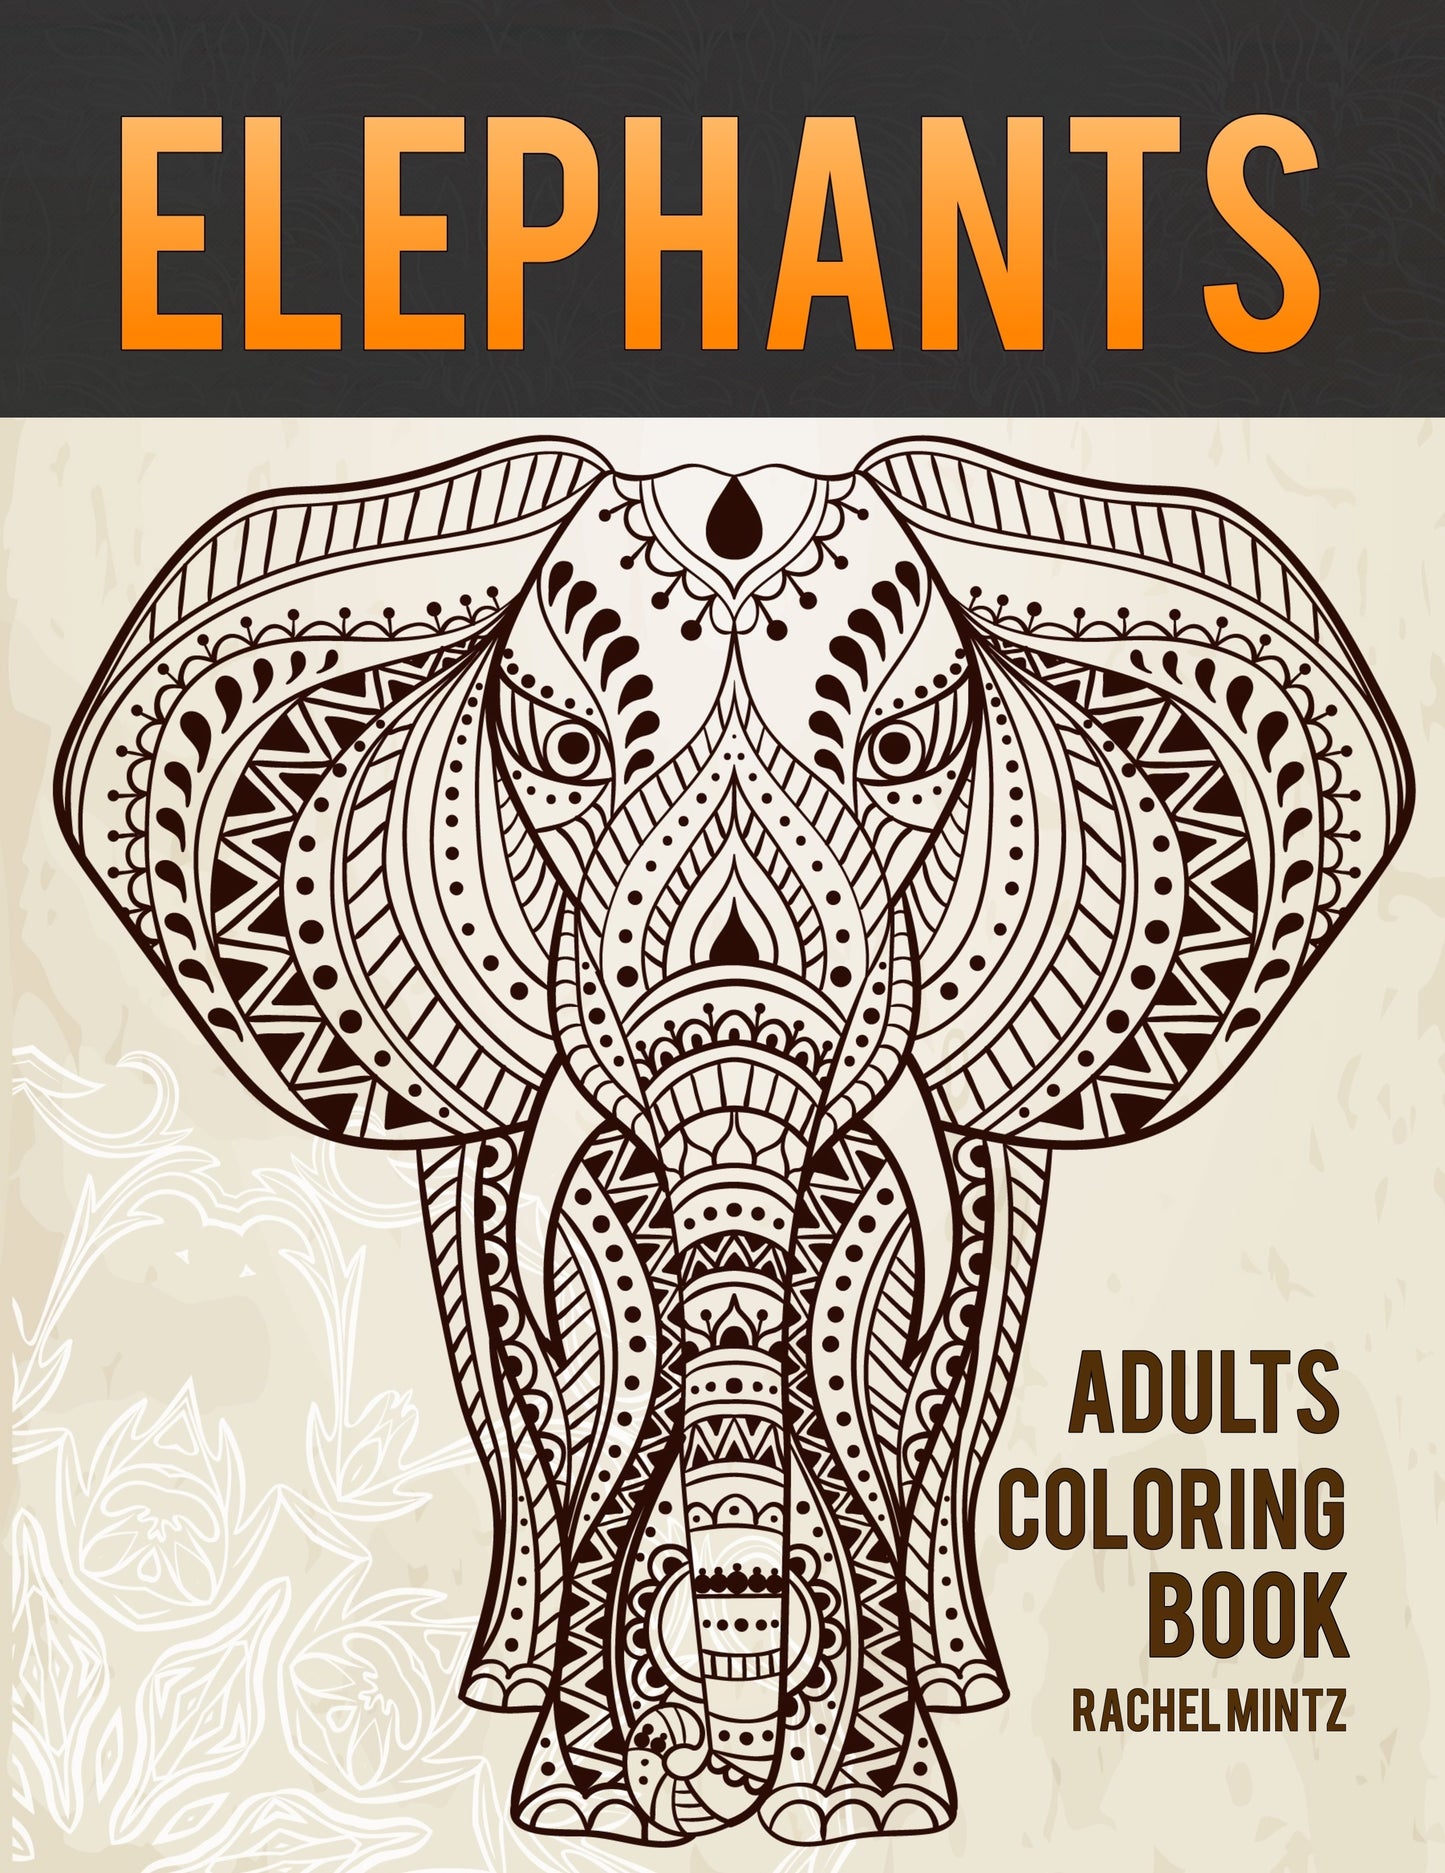 Elephants Coloring Book - The Largest African Animals in Relaxing Patterns